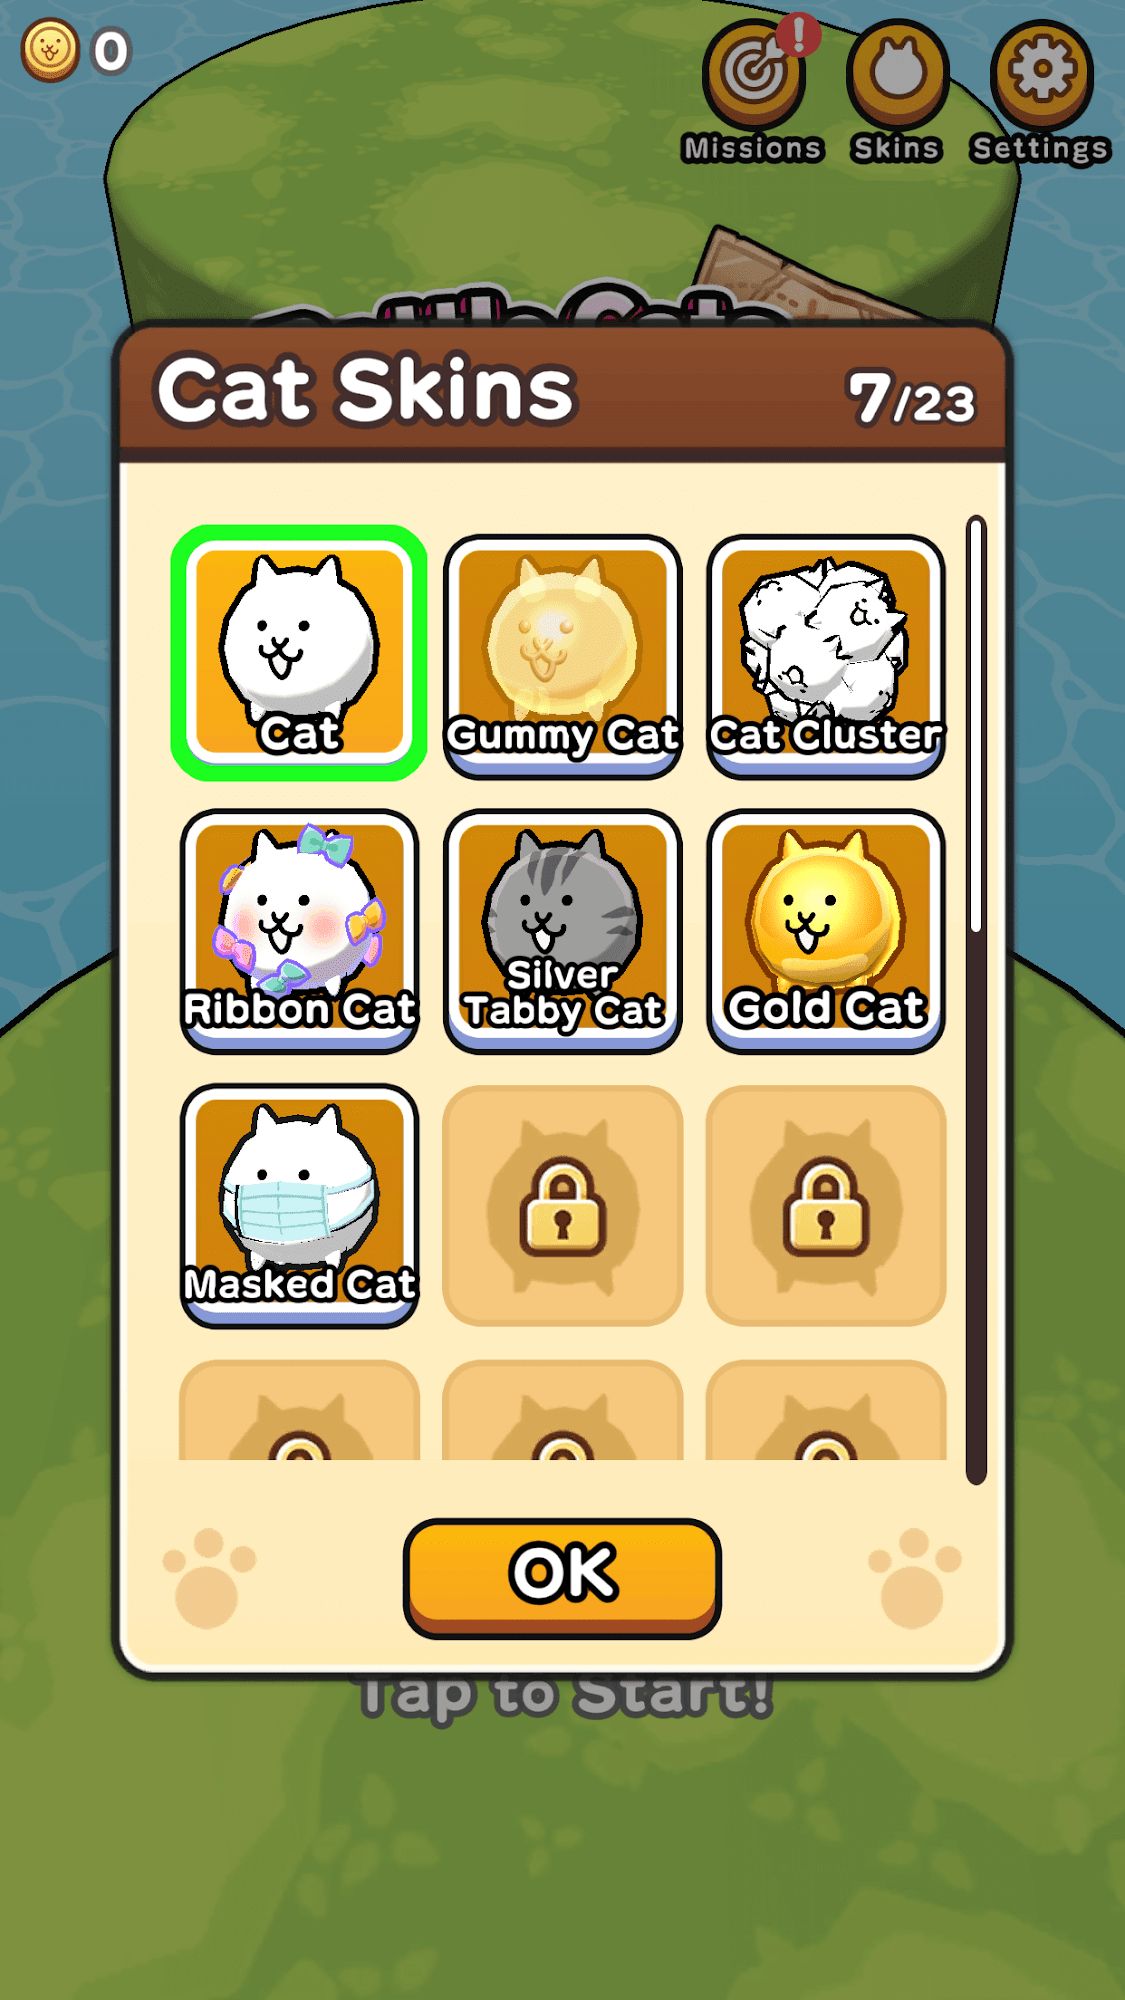 Battle Cats Quest for Android